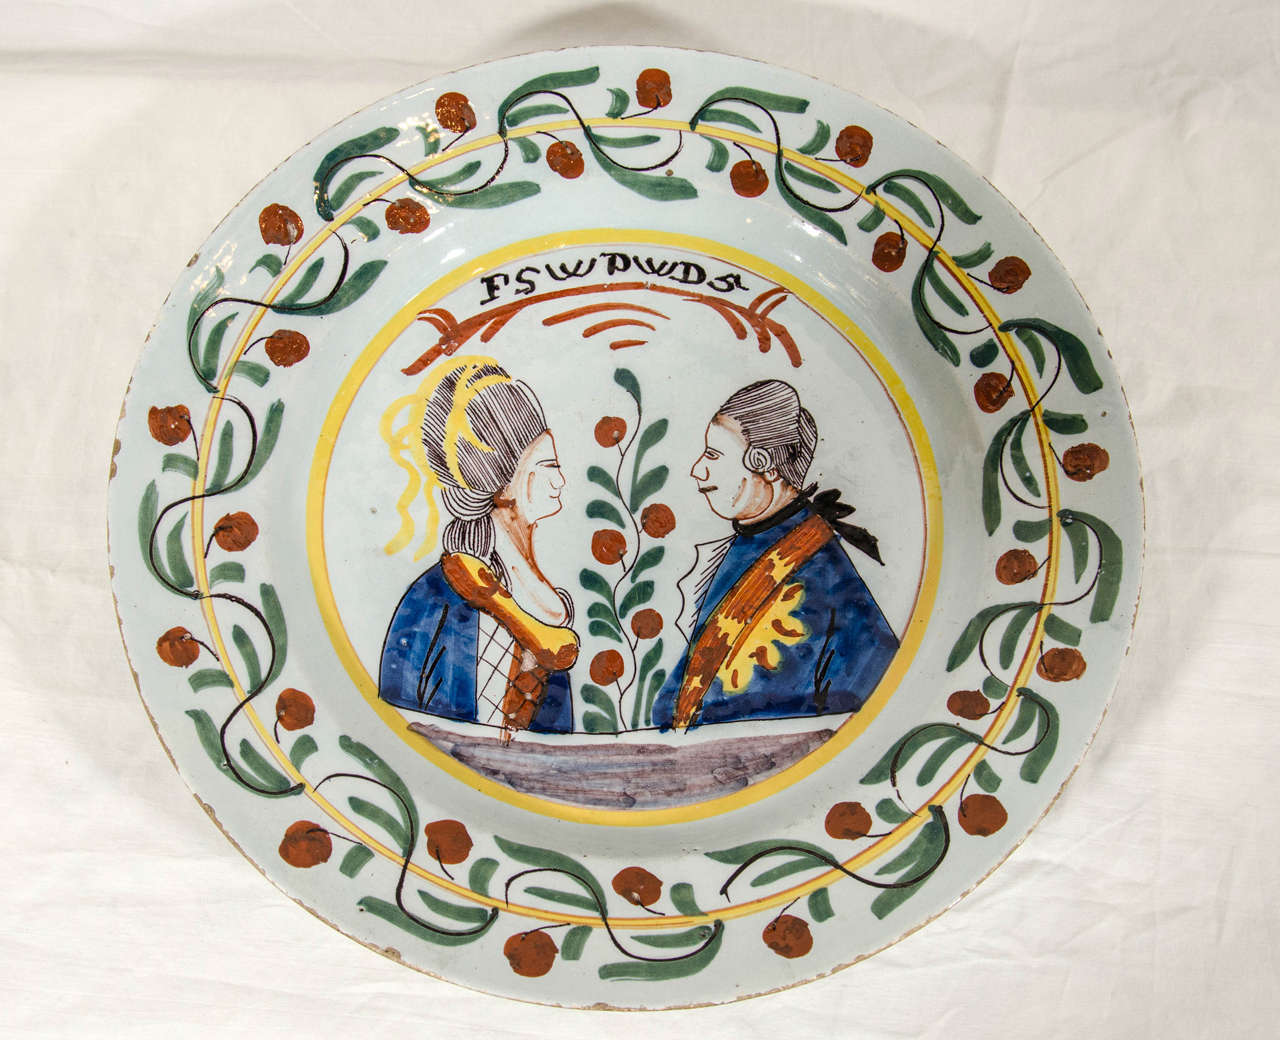 An 18th century royal commemorative Dutch delft charger in favor of the House of Orange. The center in the form of a medallion with portraits in profile depicting the marriage of Prince William V of Orange and Princess Frederica Sophia Wilhelmina of